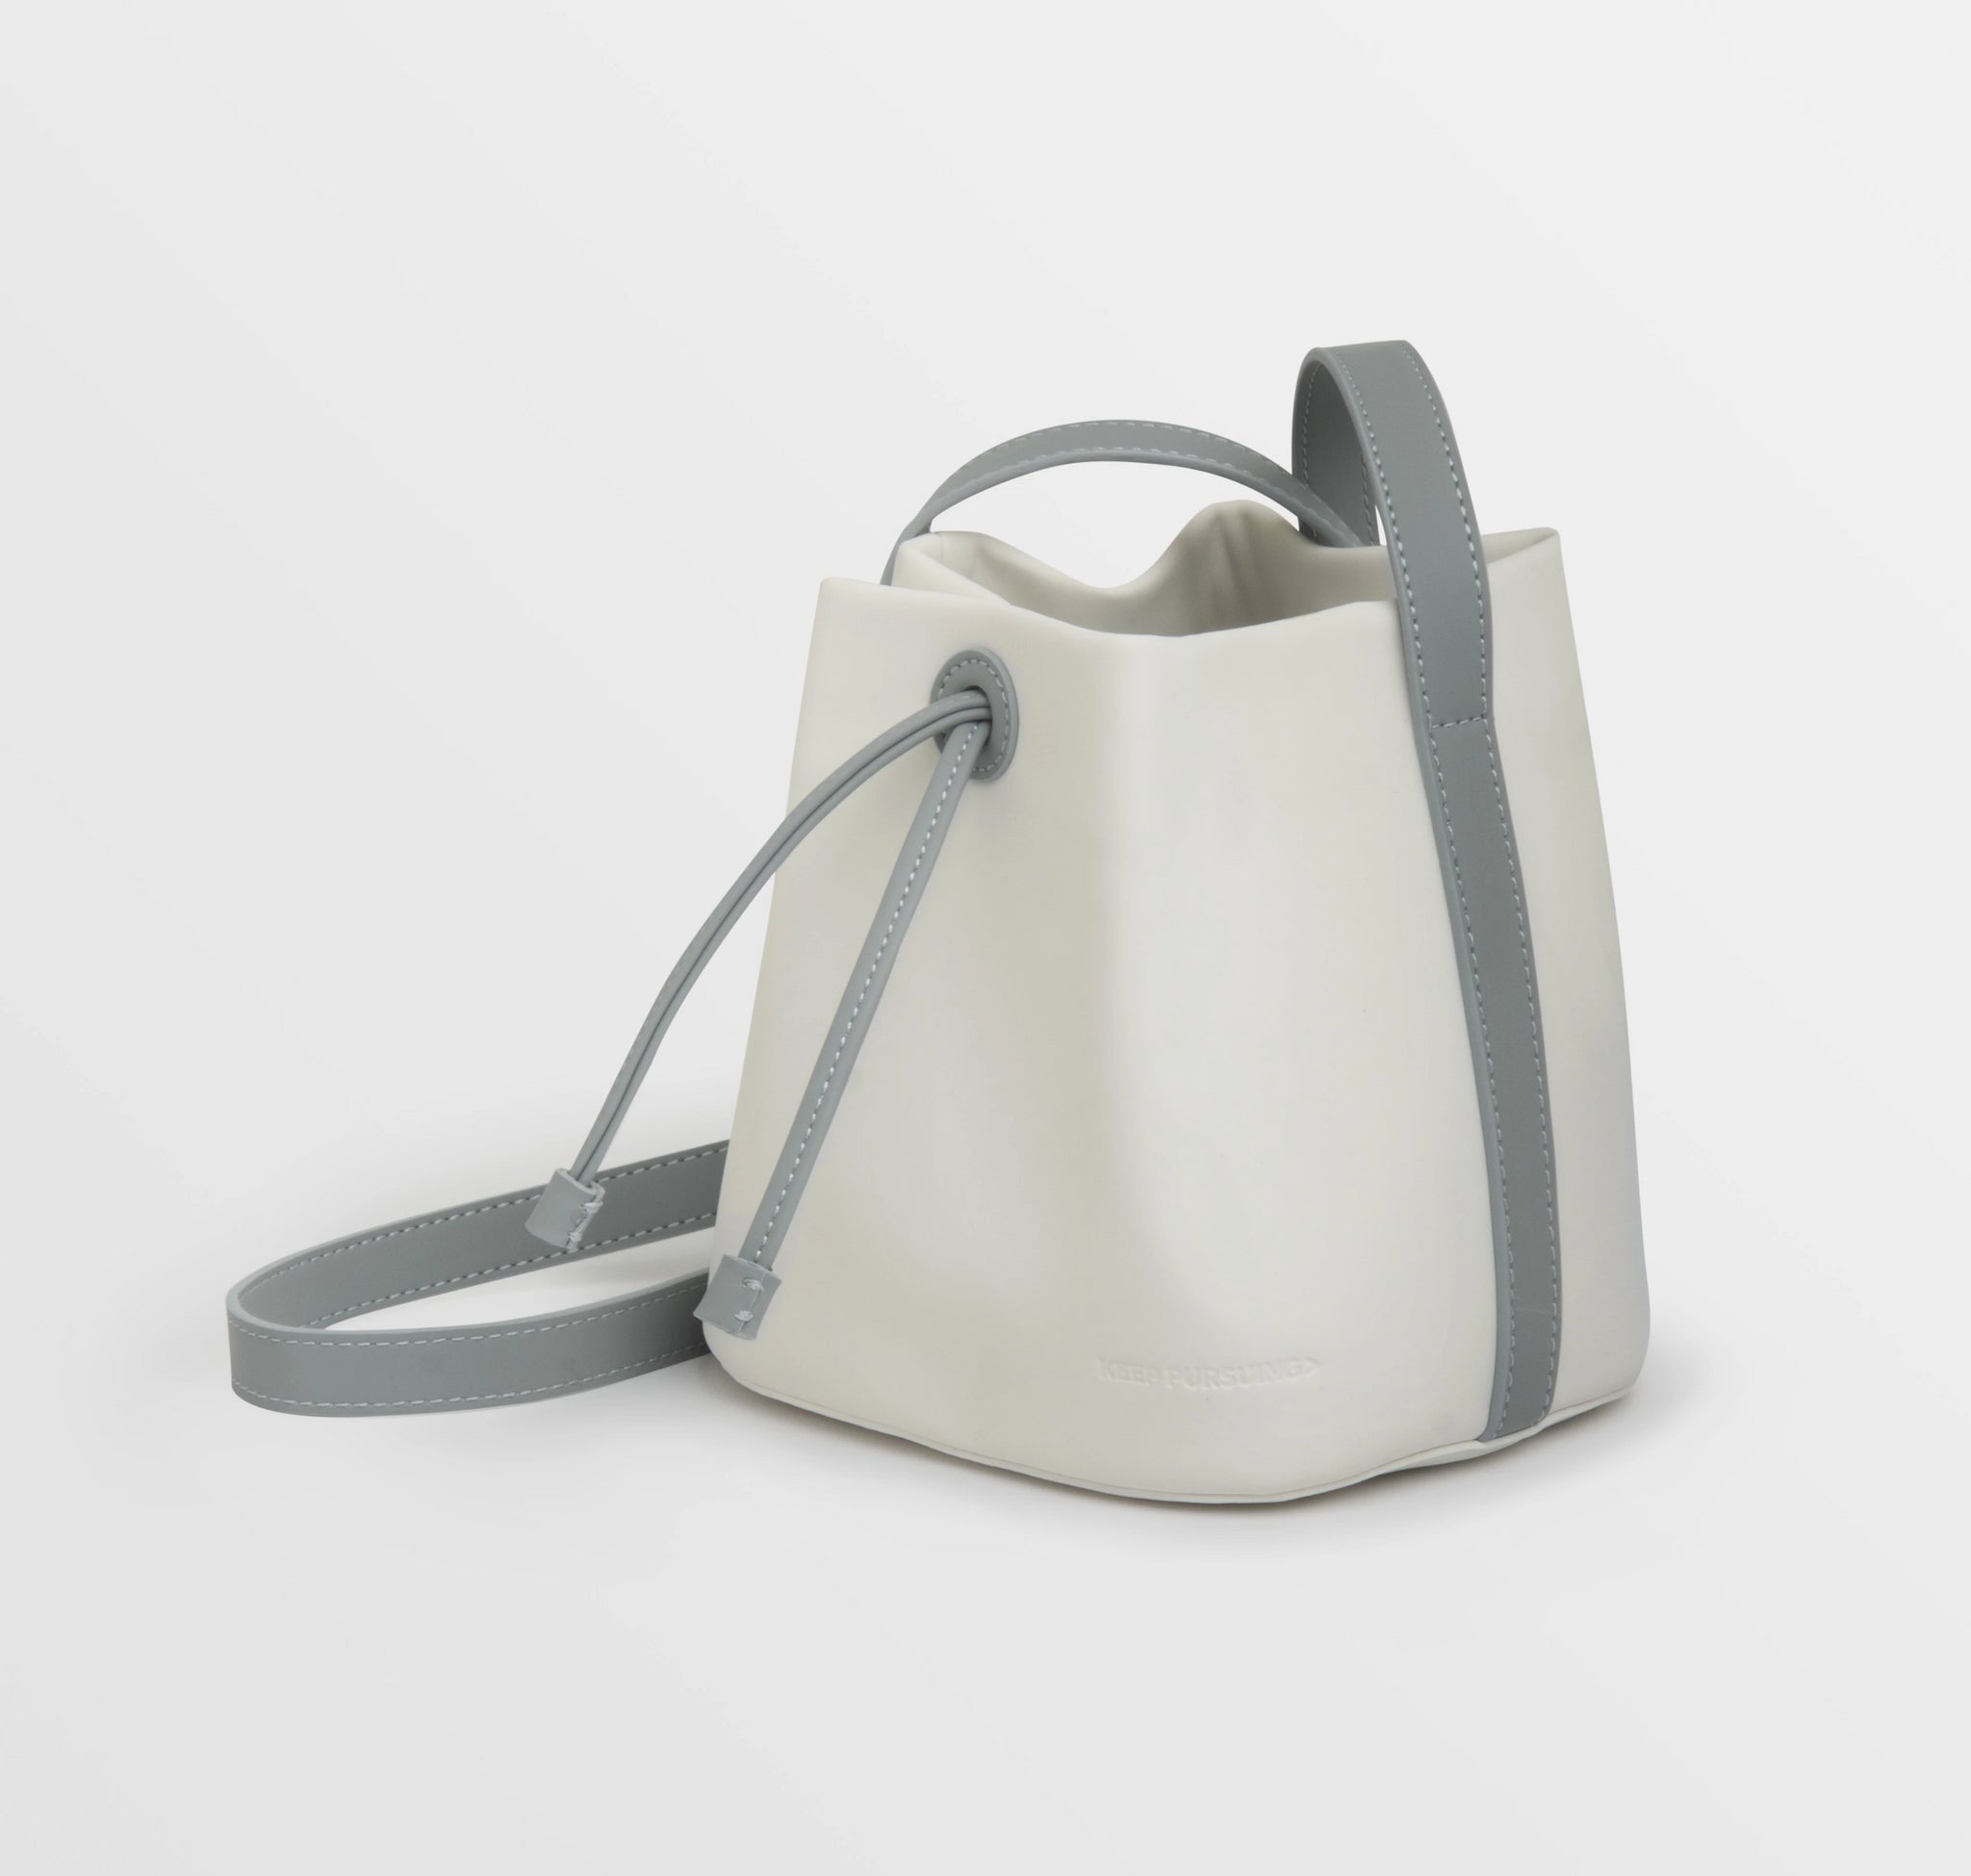 Emirates - Plane cut-out bucket bag. This edgy bucket bag is made from  leather-like PU material with cut-outs in the shape of planes to express  your love of travel.